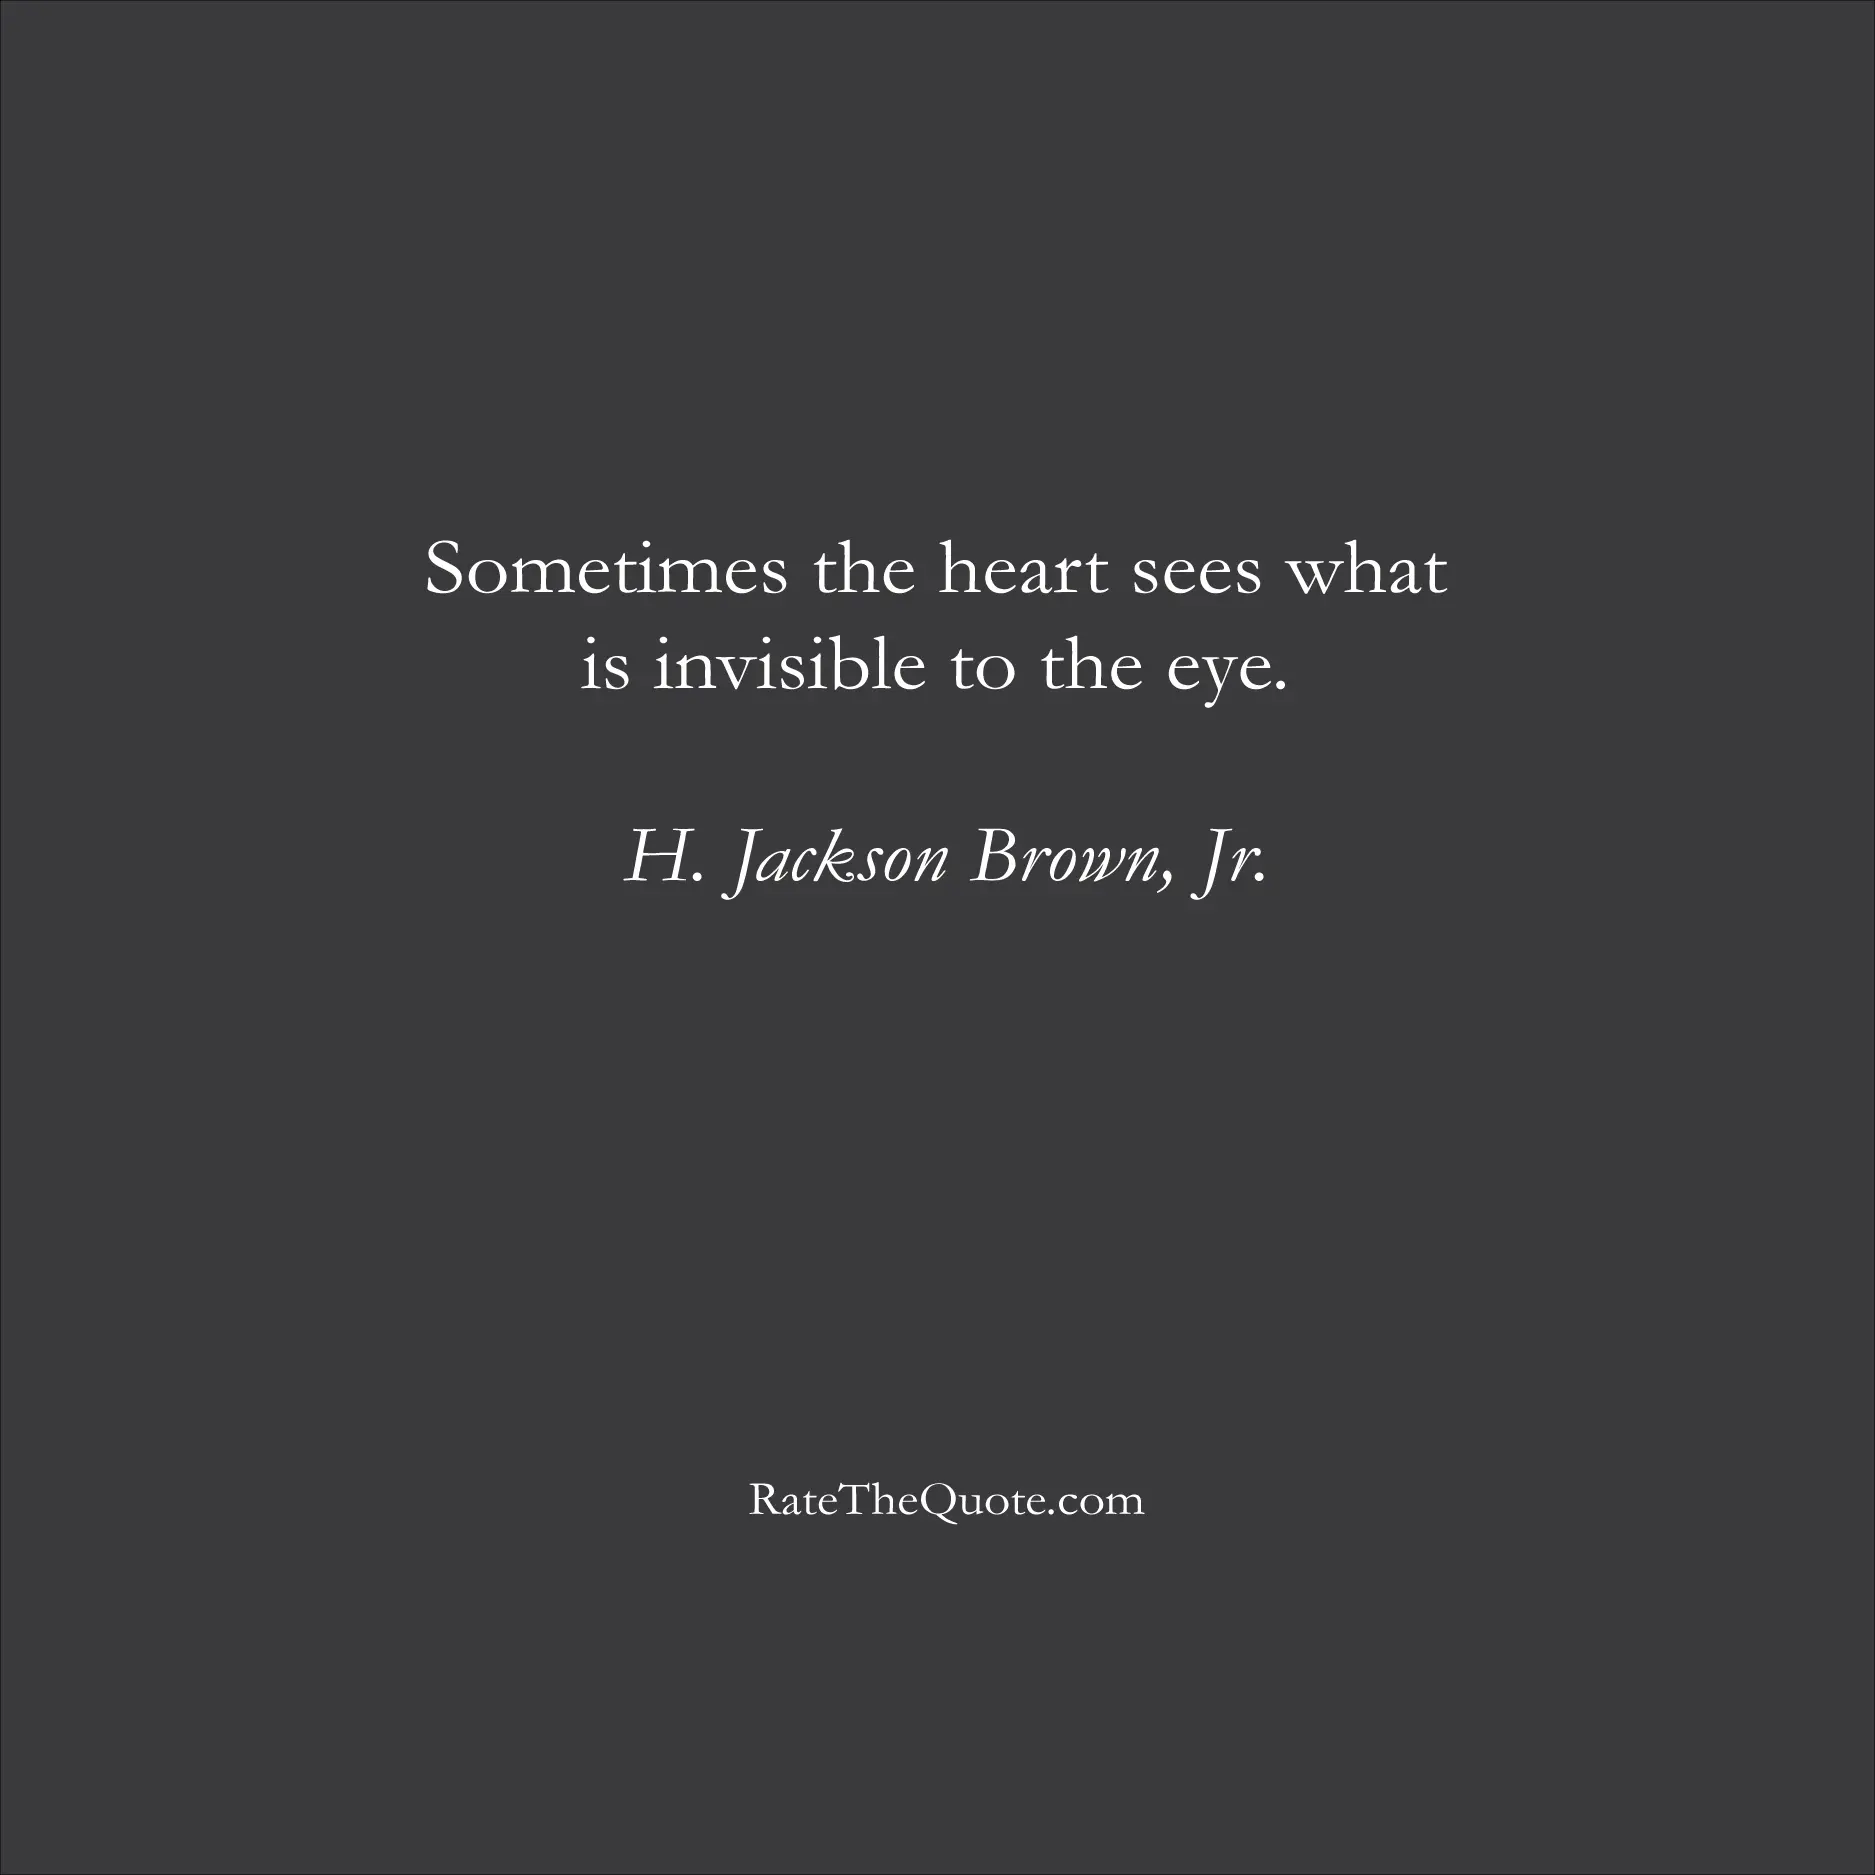 Love Quotes Sometimes the heart sees what is invisible to the eye. H. Jackson Brown, Jr.